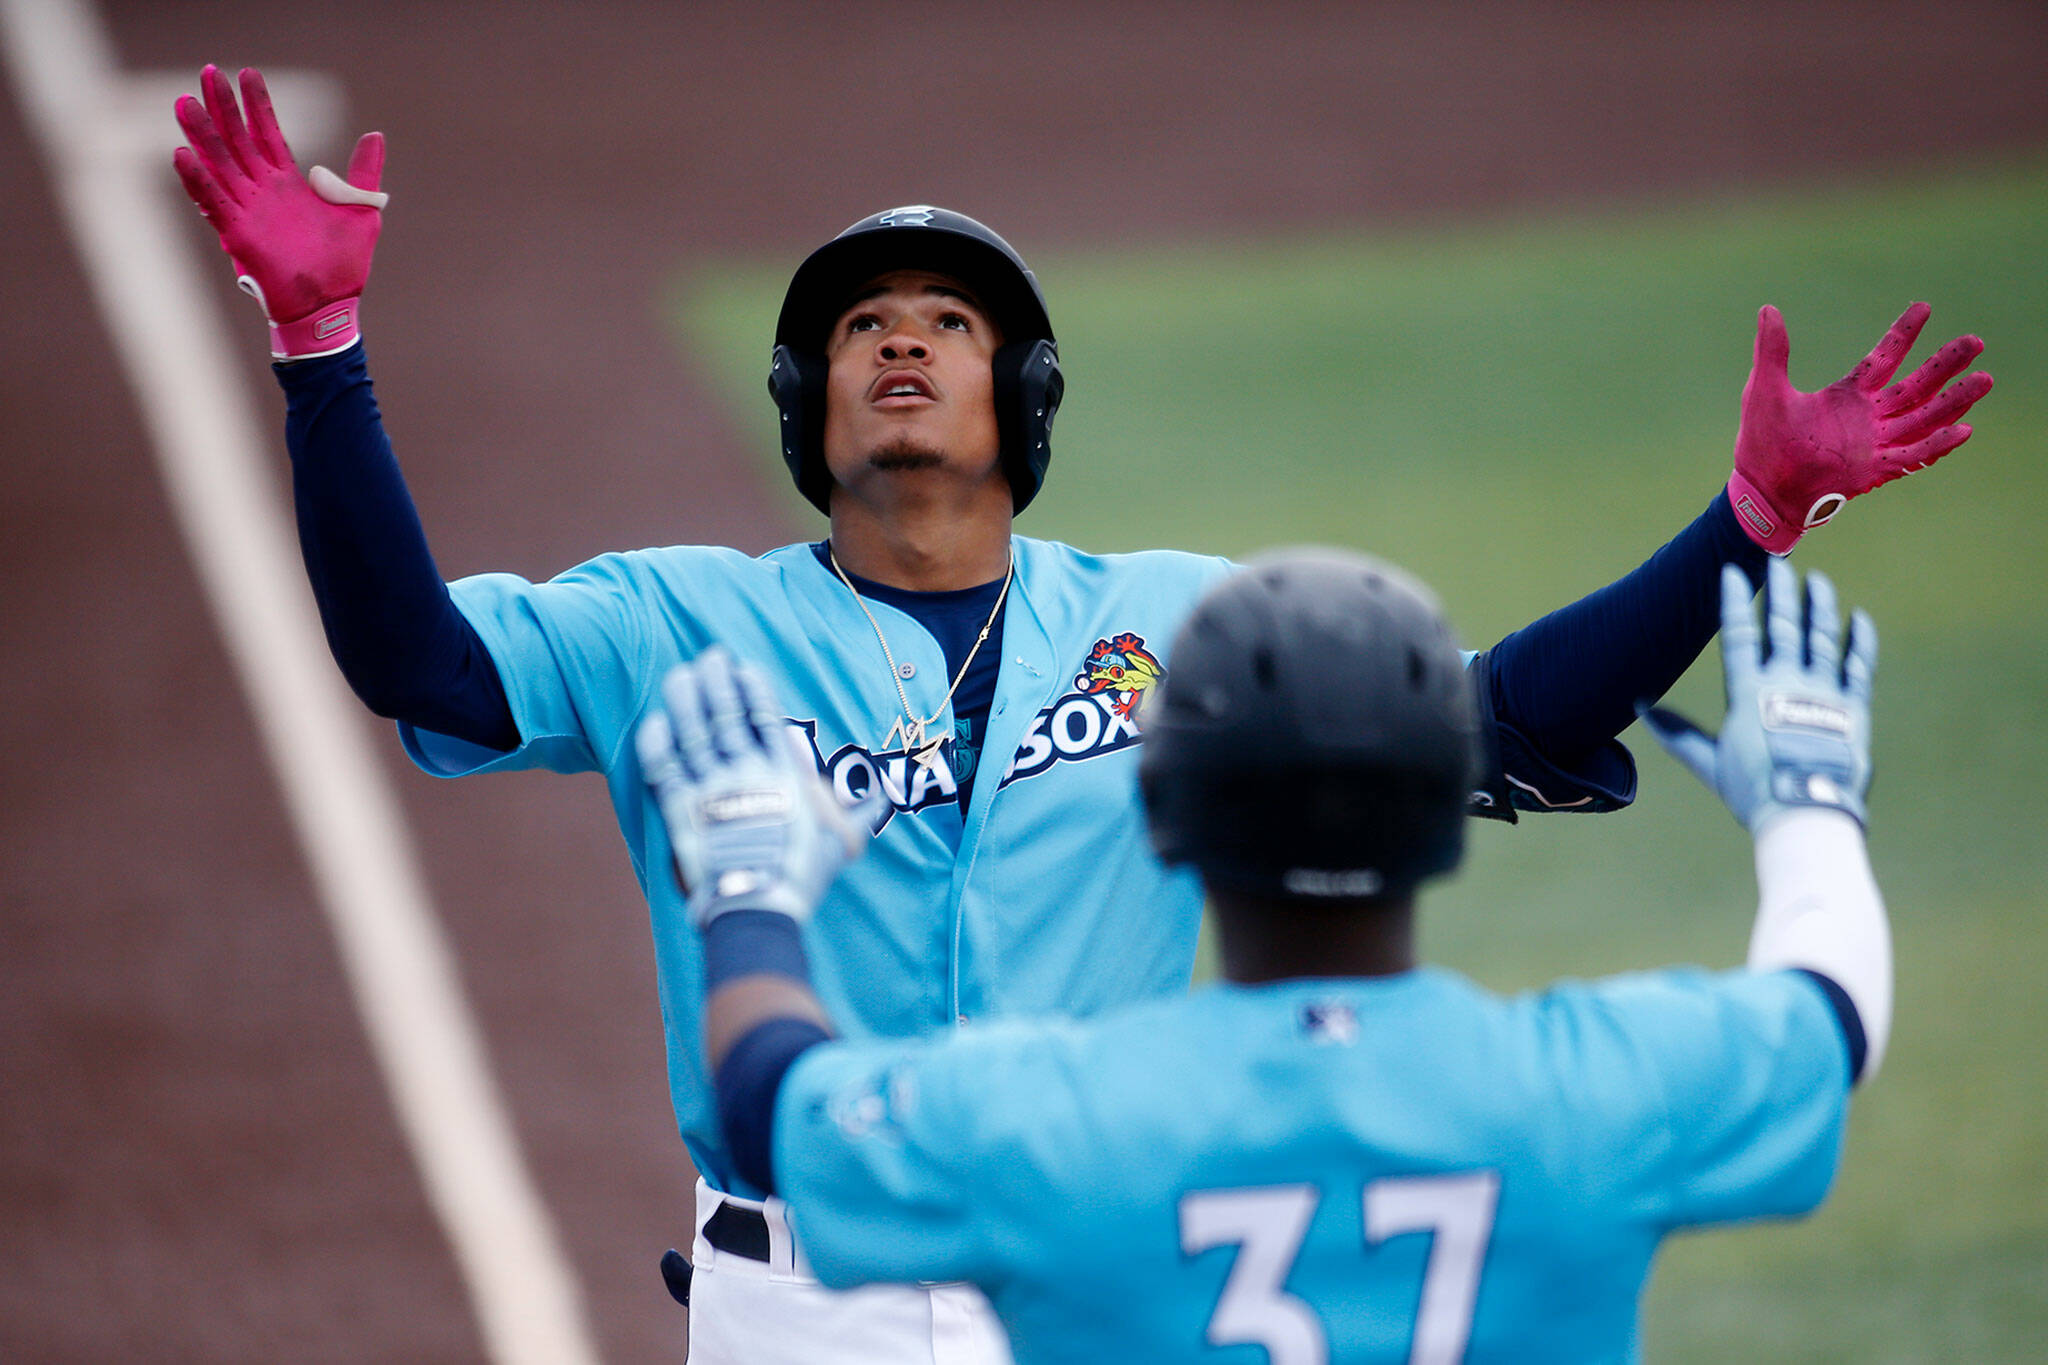 Everett AquaSox - Since its Friday and the off-season, our